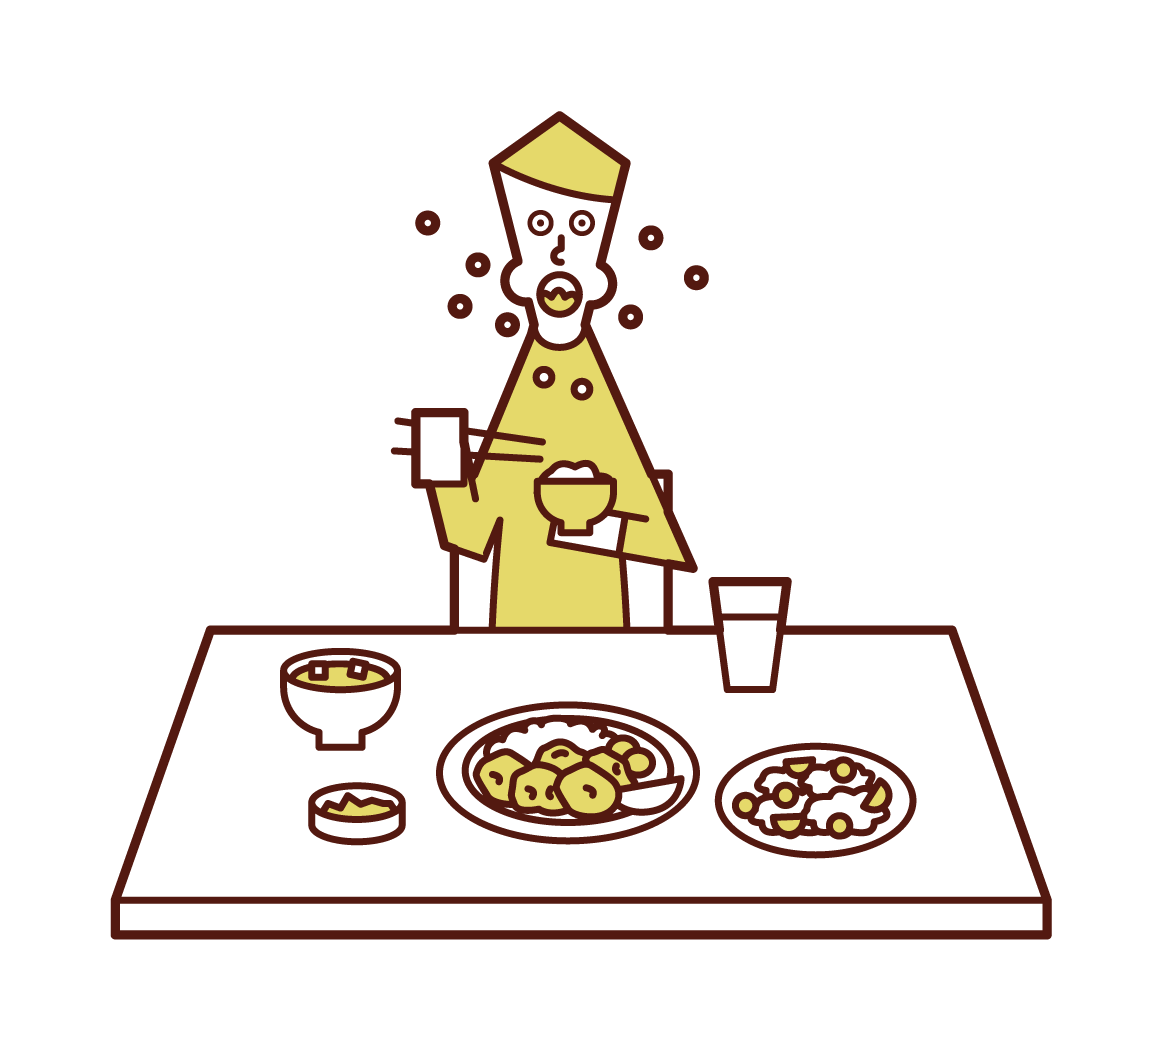 Illustration of a man eating in a hurry